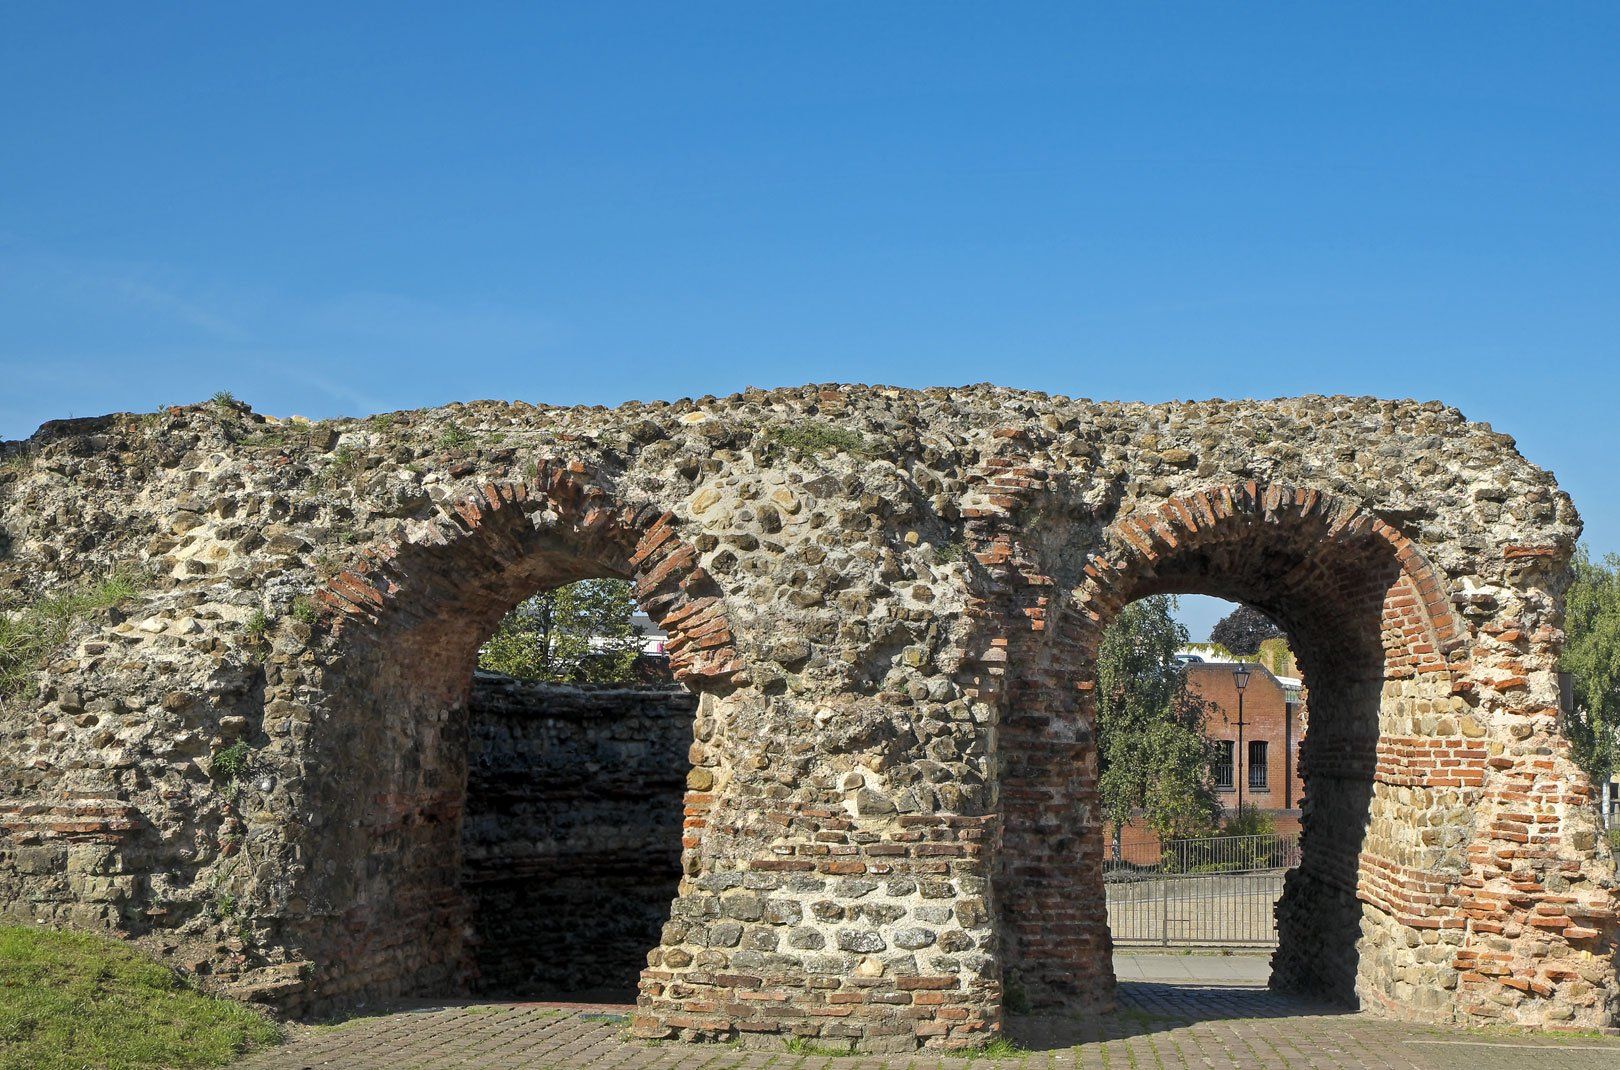 Shot of part of the Camulodunum walls in Colchester